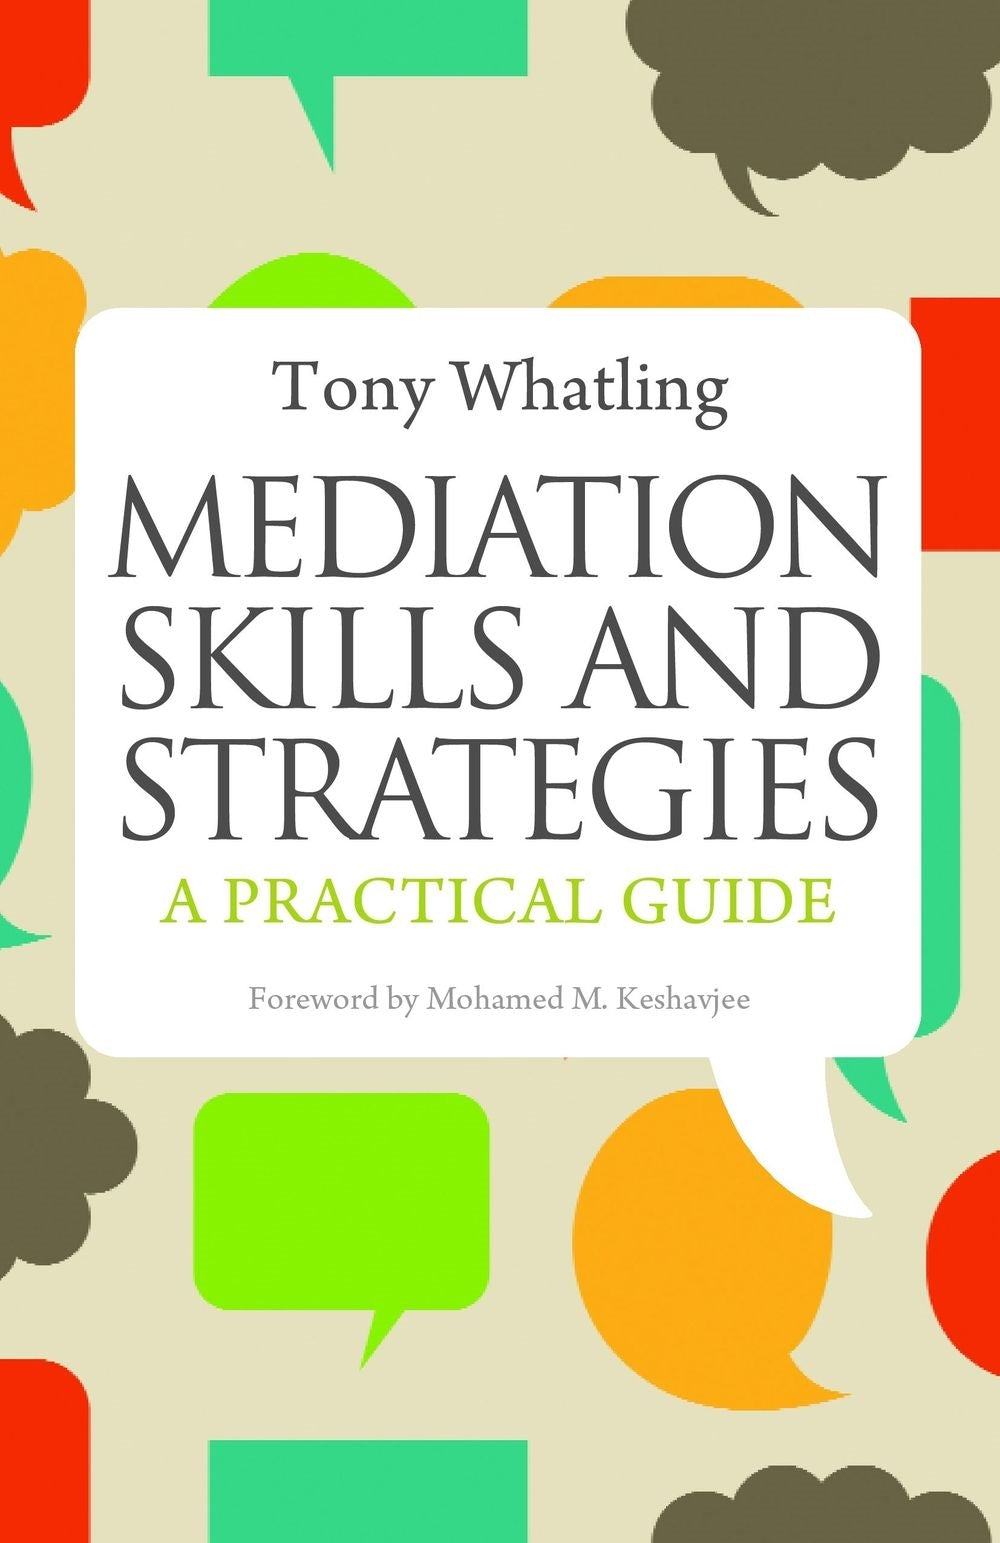 Mediation Skills and Strategies by Tony Whatling